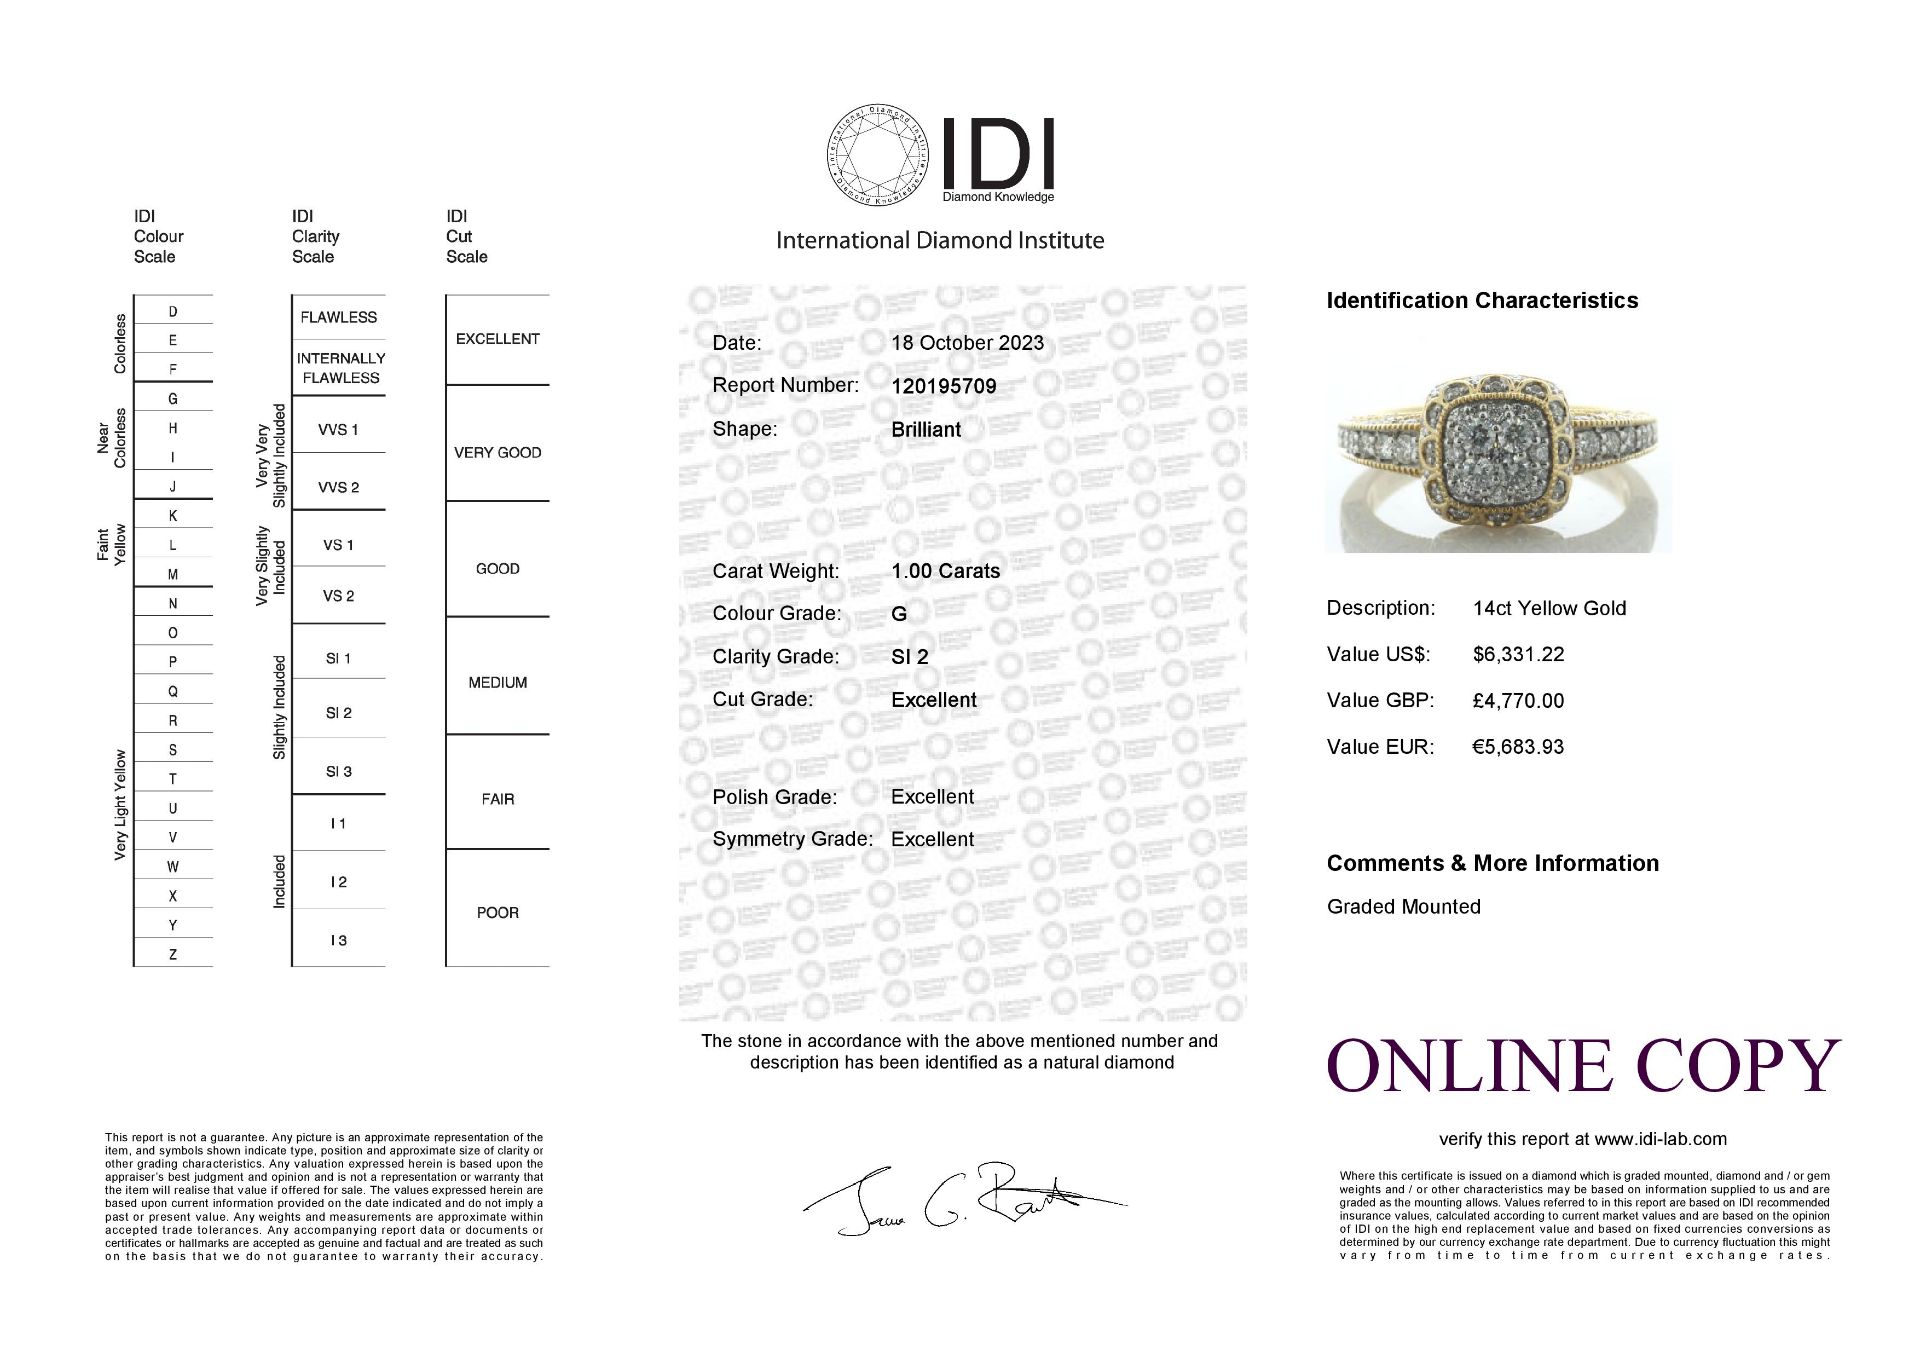 14ct Yellow Gold Cushion Shaped Cluster Diamond Ring 1.00 Carats - Valued By IDI £4,770.00 - This - Image 7 of 7